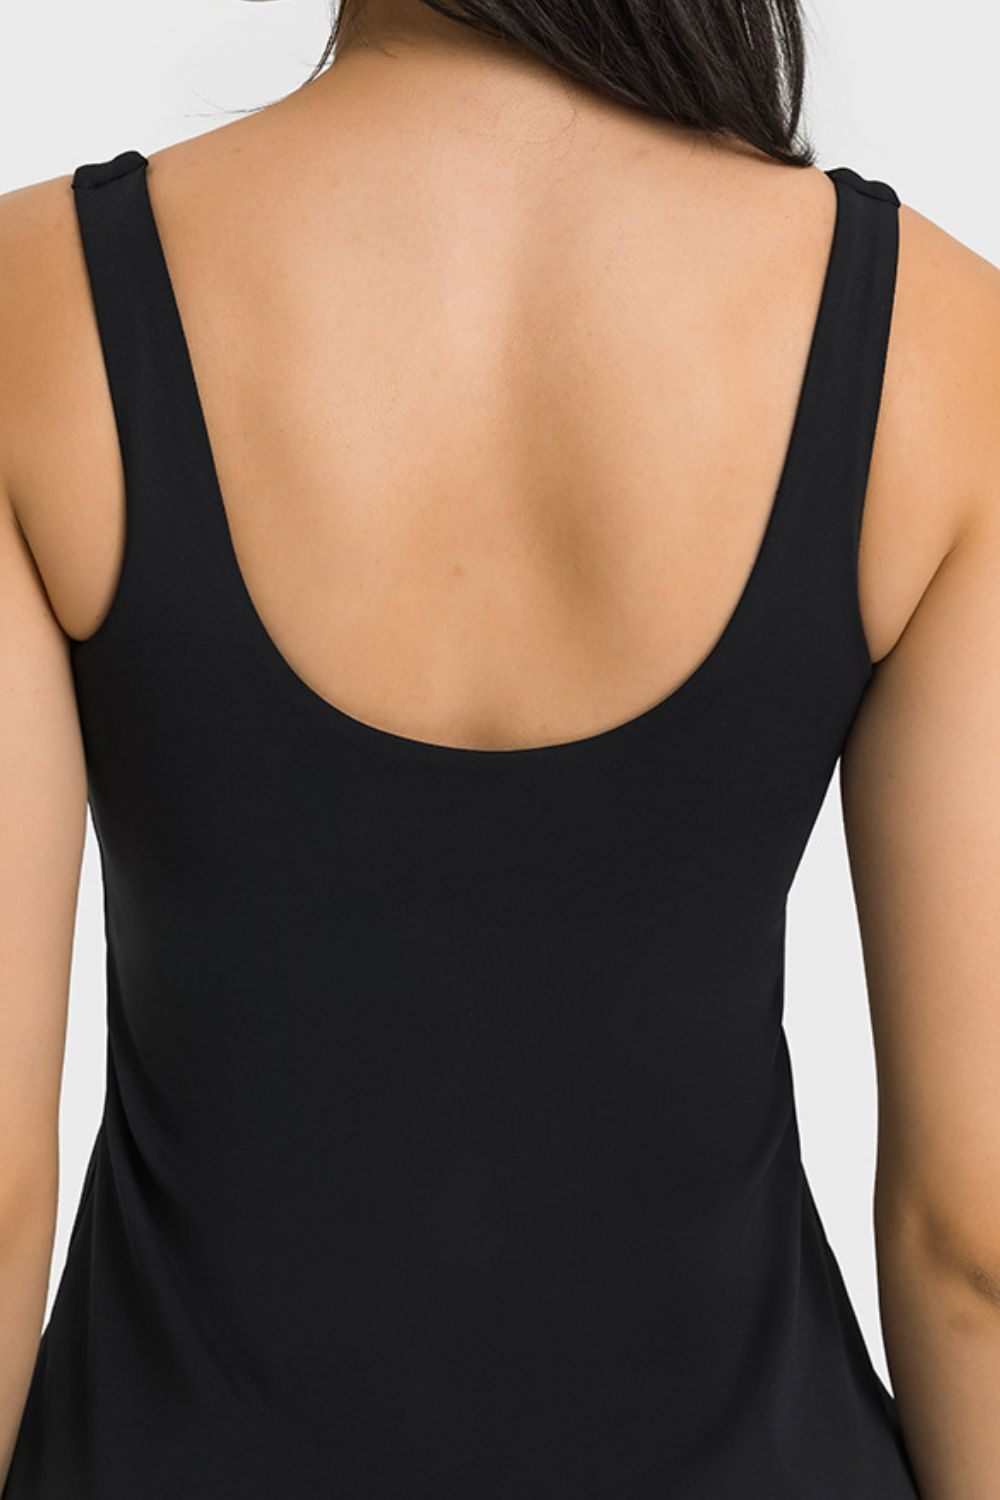 Square Neck Sports Tank Dress with Full Coverage Bottoms (3 Colors)